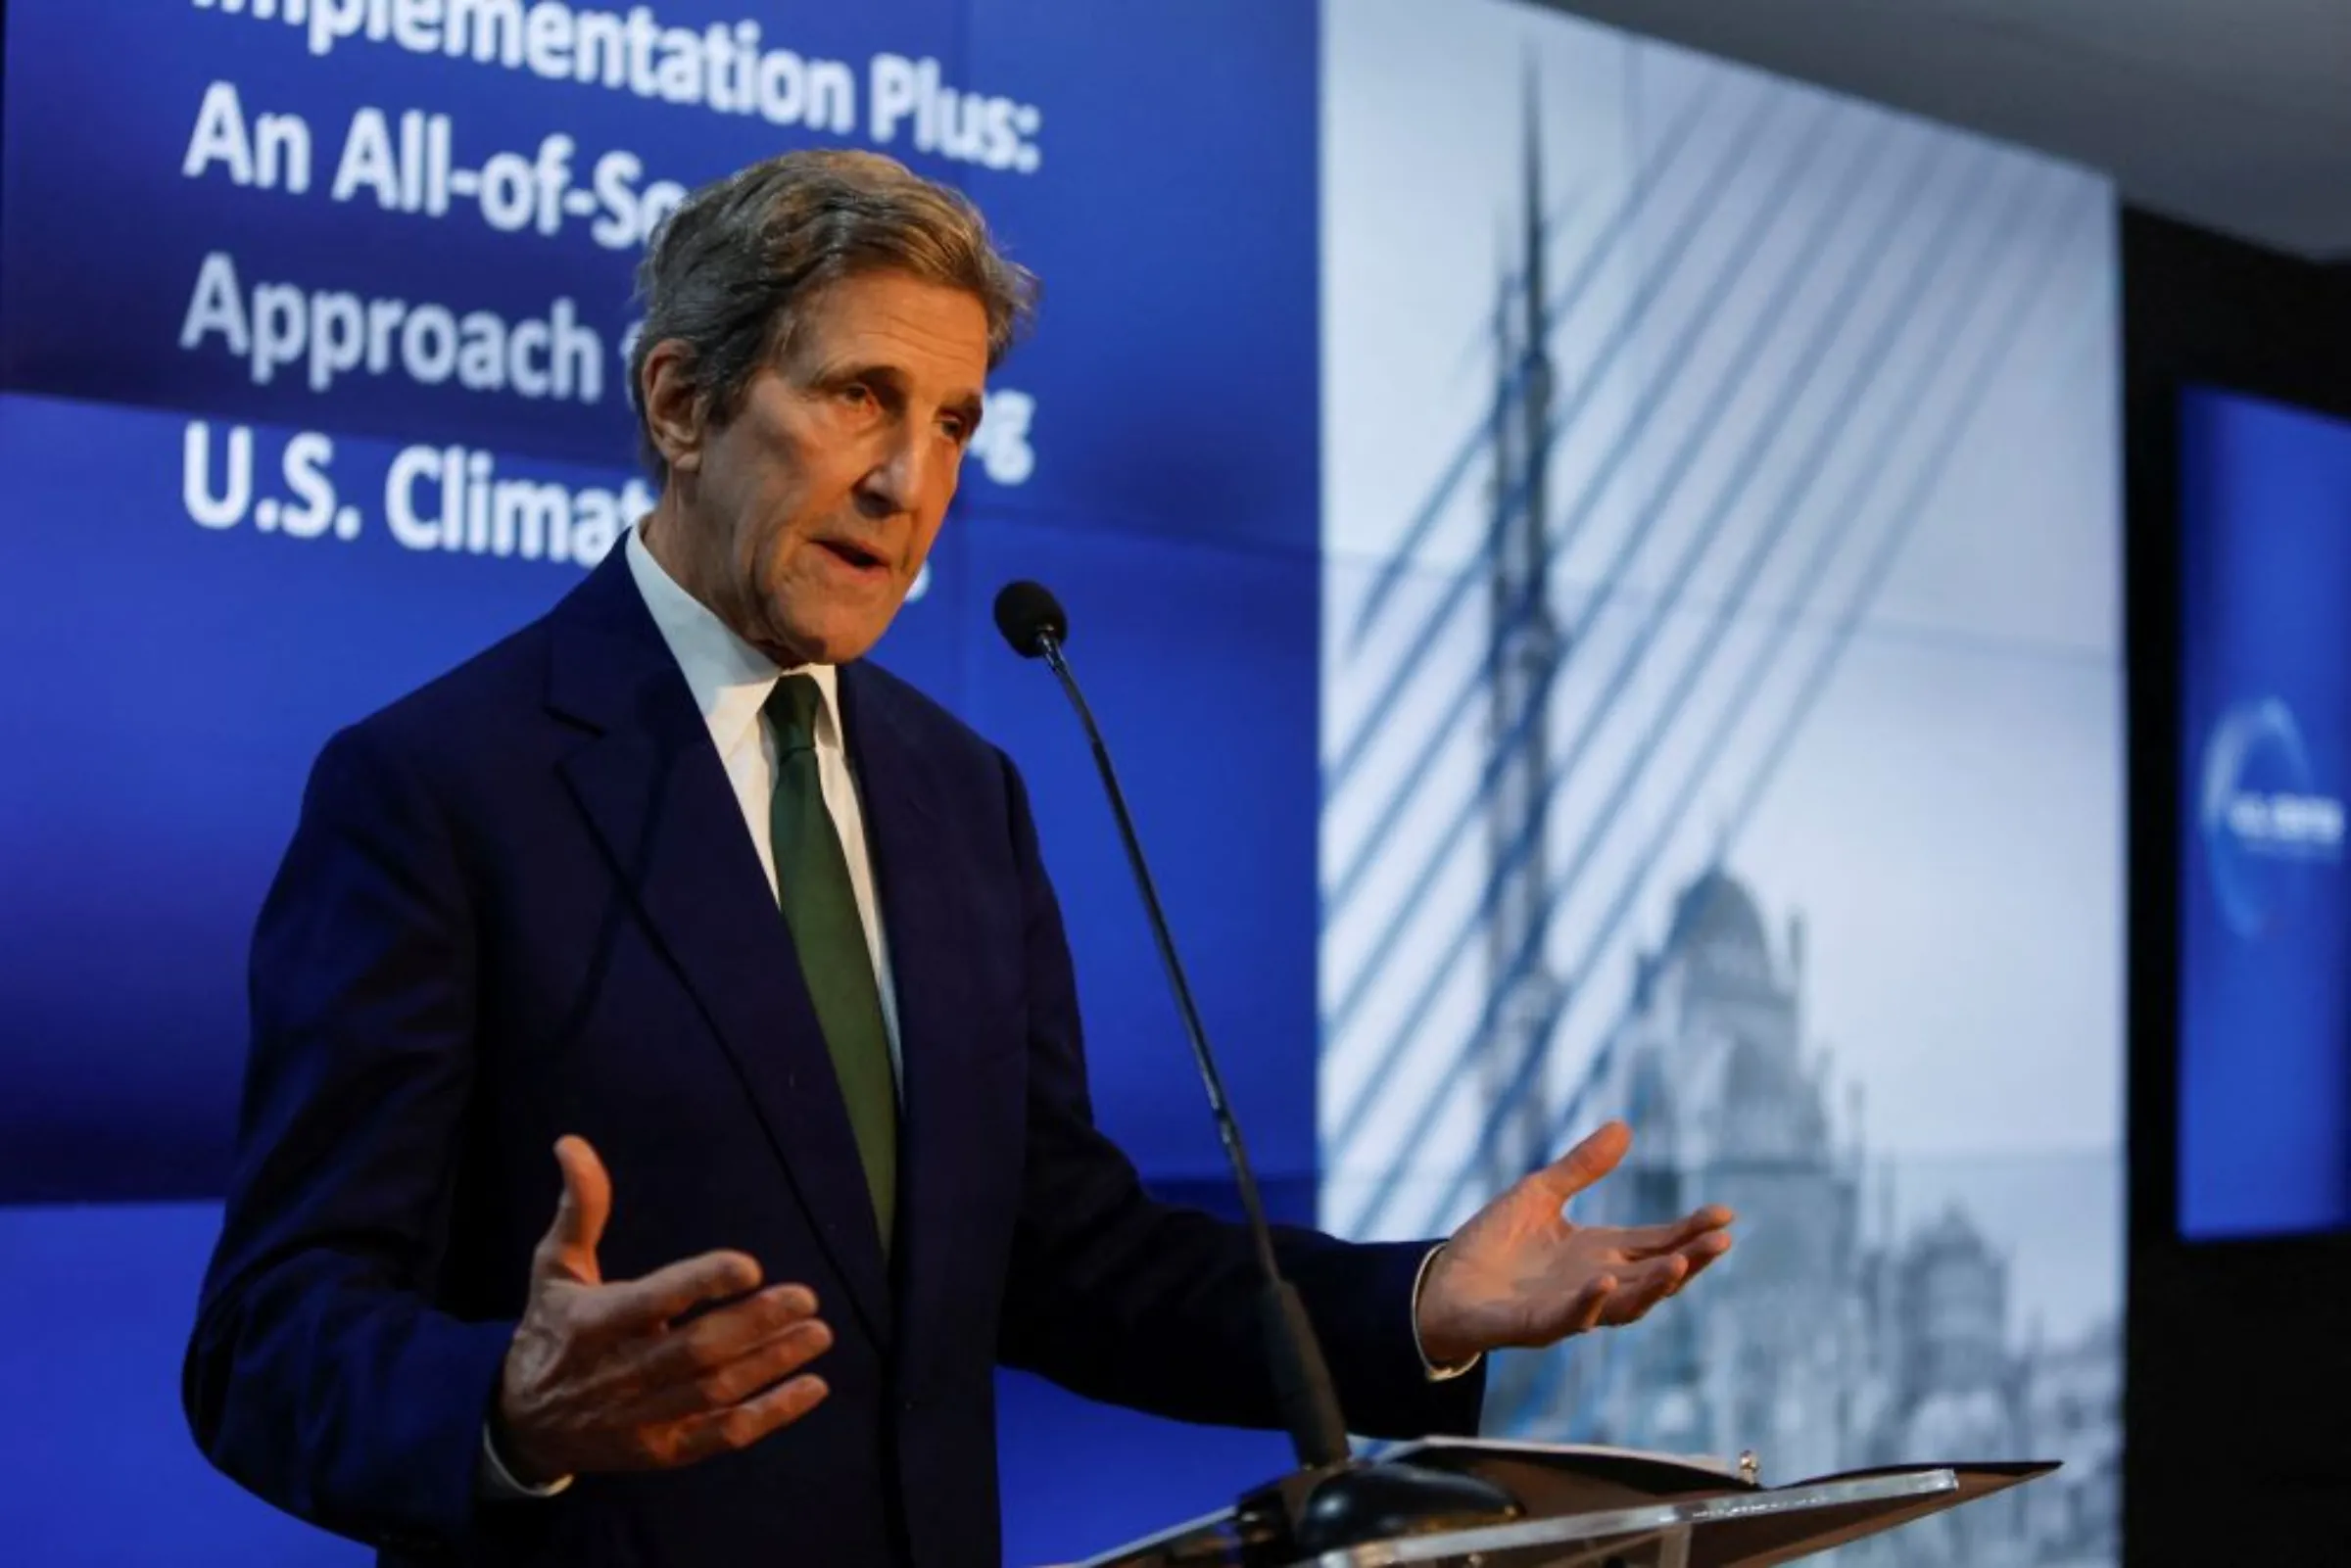 John Kerry, U.S. Special Envoy for Climate speaks as he attends the opening of the American Pavilion in the COP27 climate summit in Egypt's Red Sea resort of Sharm el-Sheikh, Egypt November 8, 2022